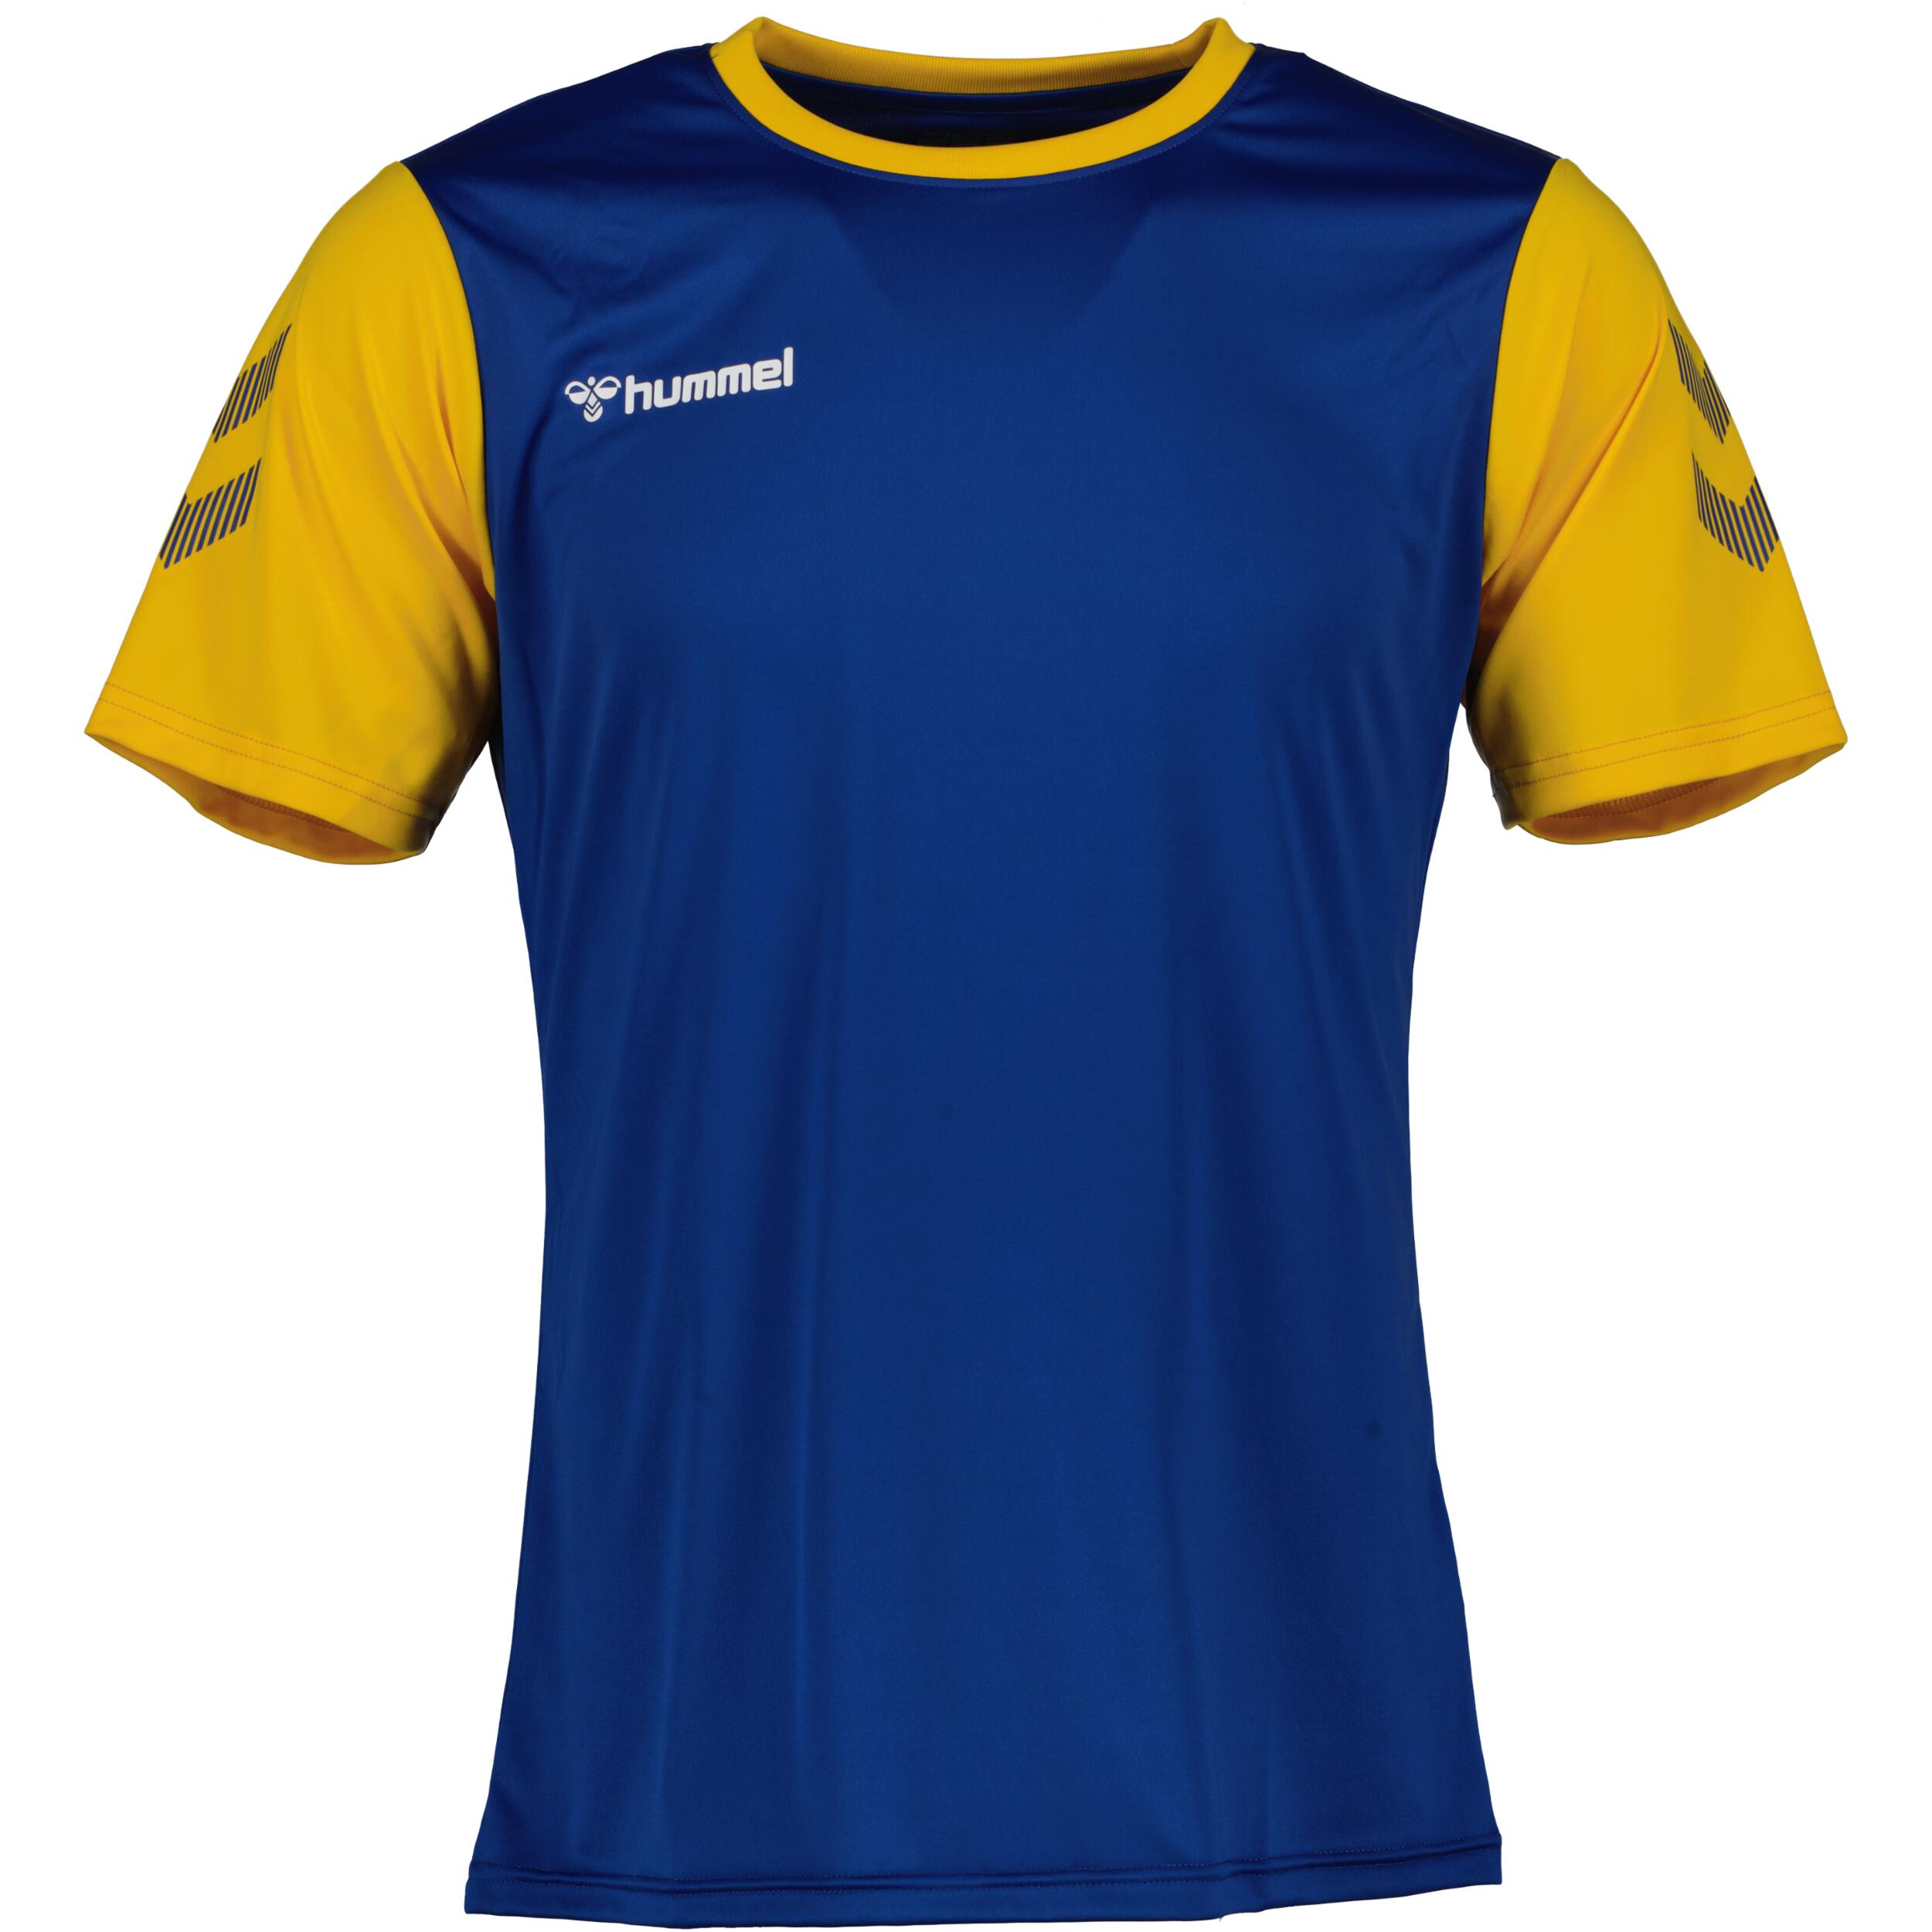 HUMMEL Match jersey for men, great for football, in blue/yellow